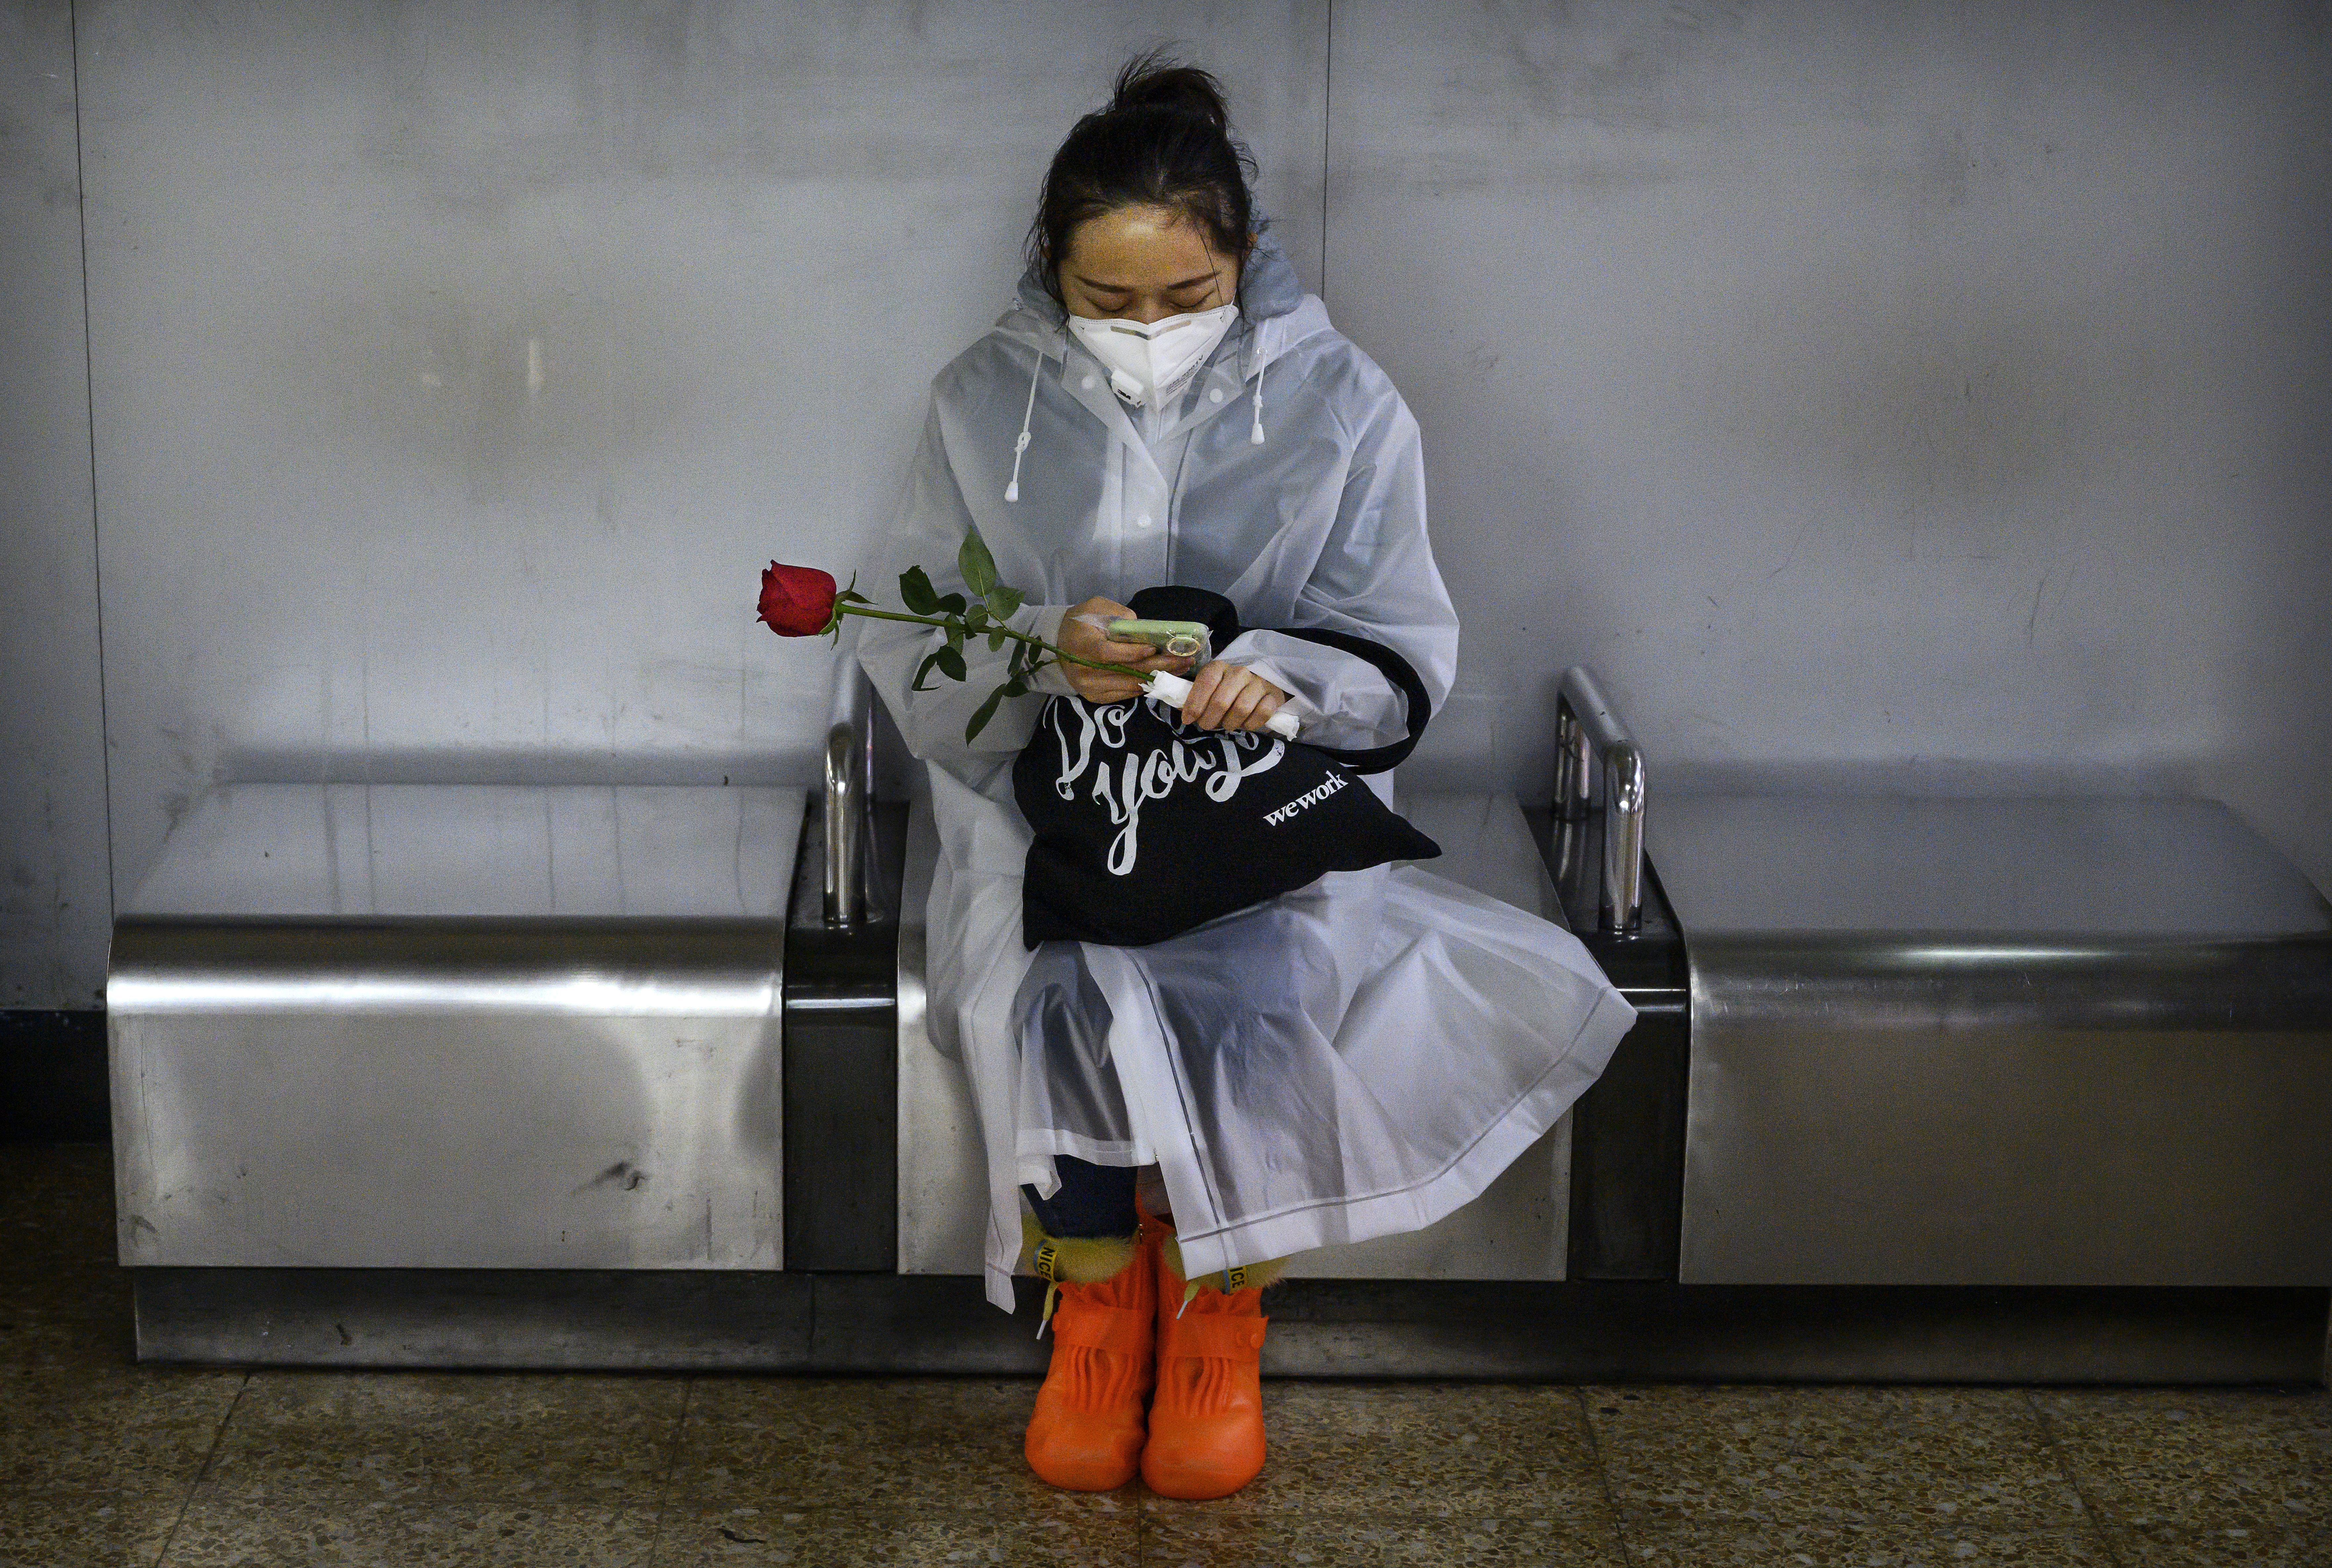 In this image, a woman in a protective face mask and poncho sits with a single red rose at a bus stop